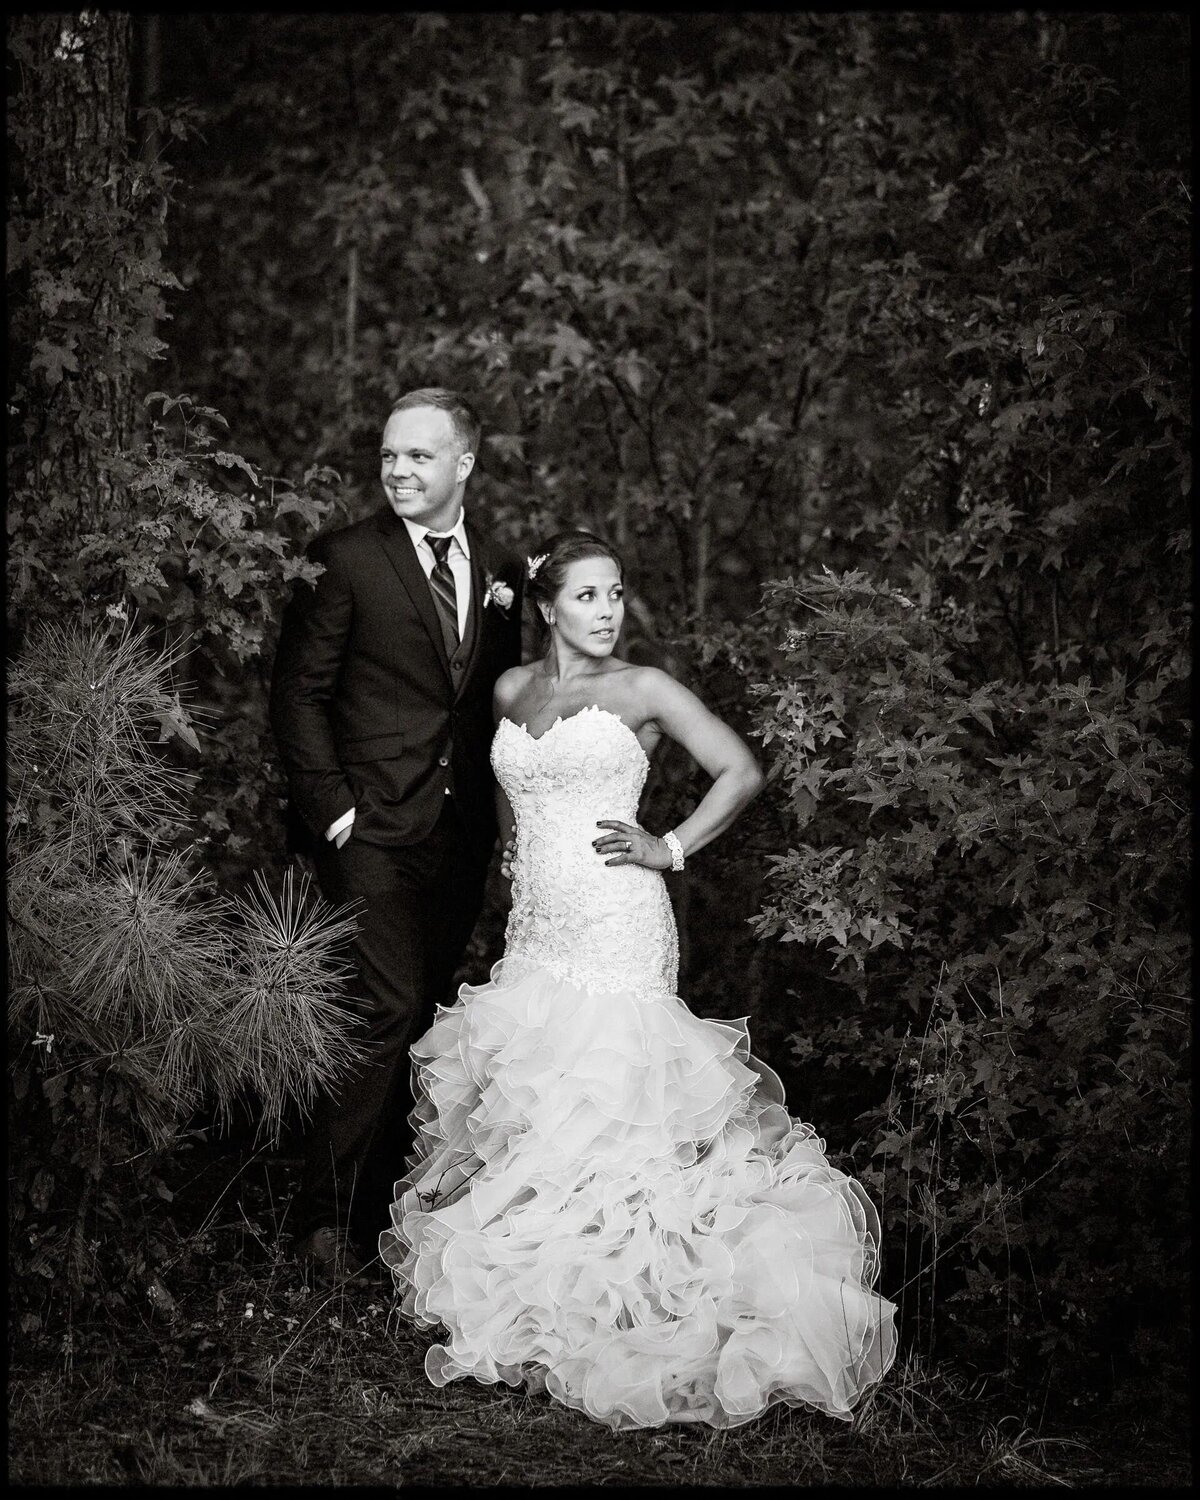 Black and white portrait of a bride and groom in a forest setting, with the groom looking at the camera and the bride looking away.